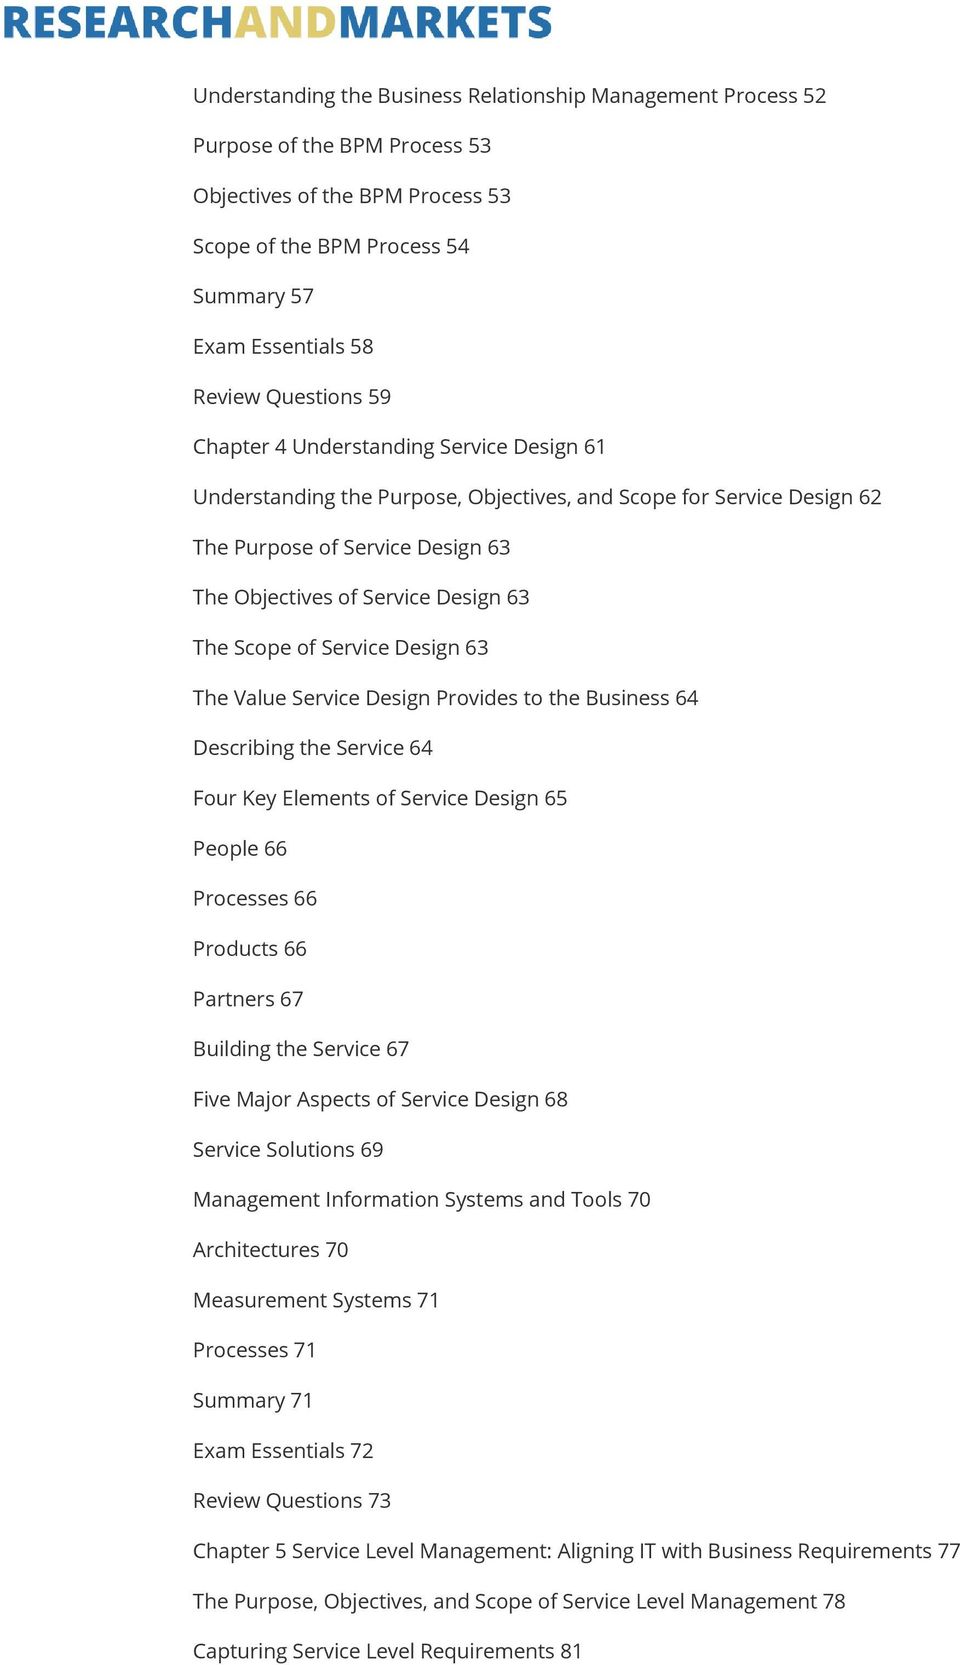 Service Design 63 The Value Service Design Provides to the Business 64 Describing the Service 64 Four Key Elements of Service Design 65 People 66 Processes 66 Products 66 Partners 67 Building the